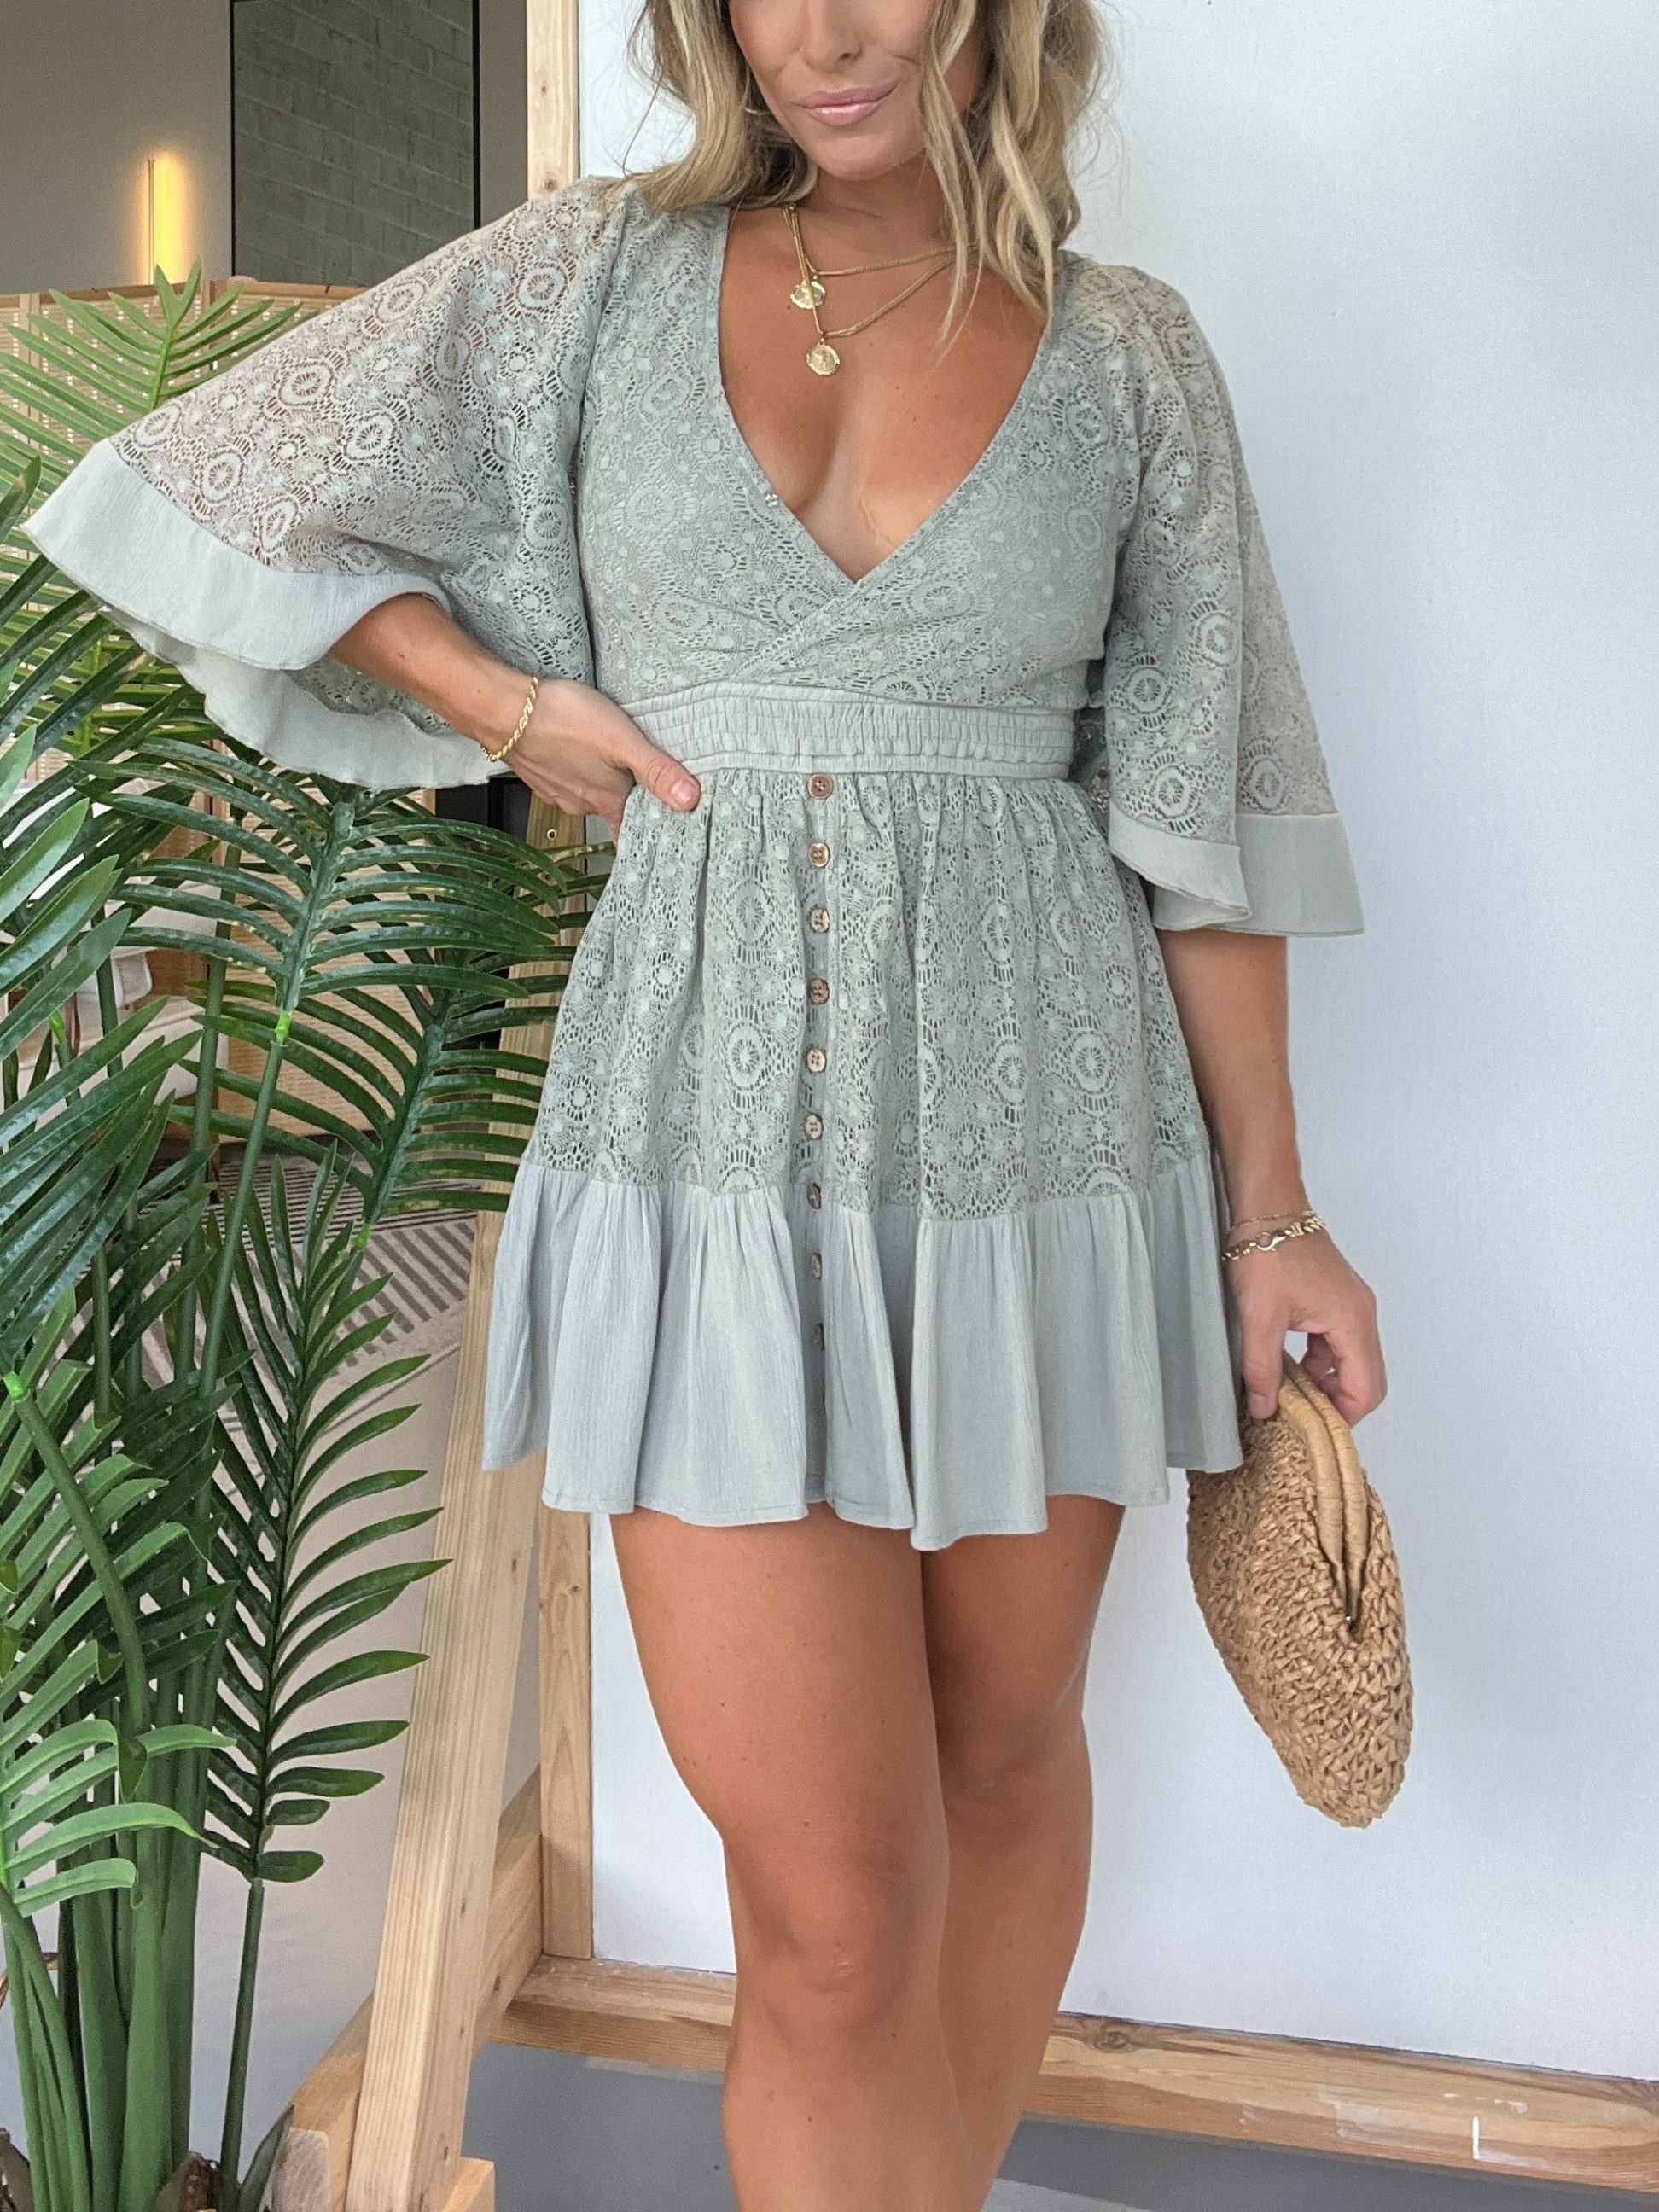 WOMEN'S LACE CROCHET ROMPER DRESS WITH BUILT-IN SHORTS (BUY 2 FREE SHIPPING)